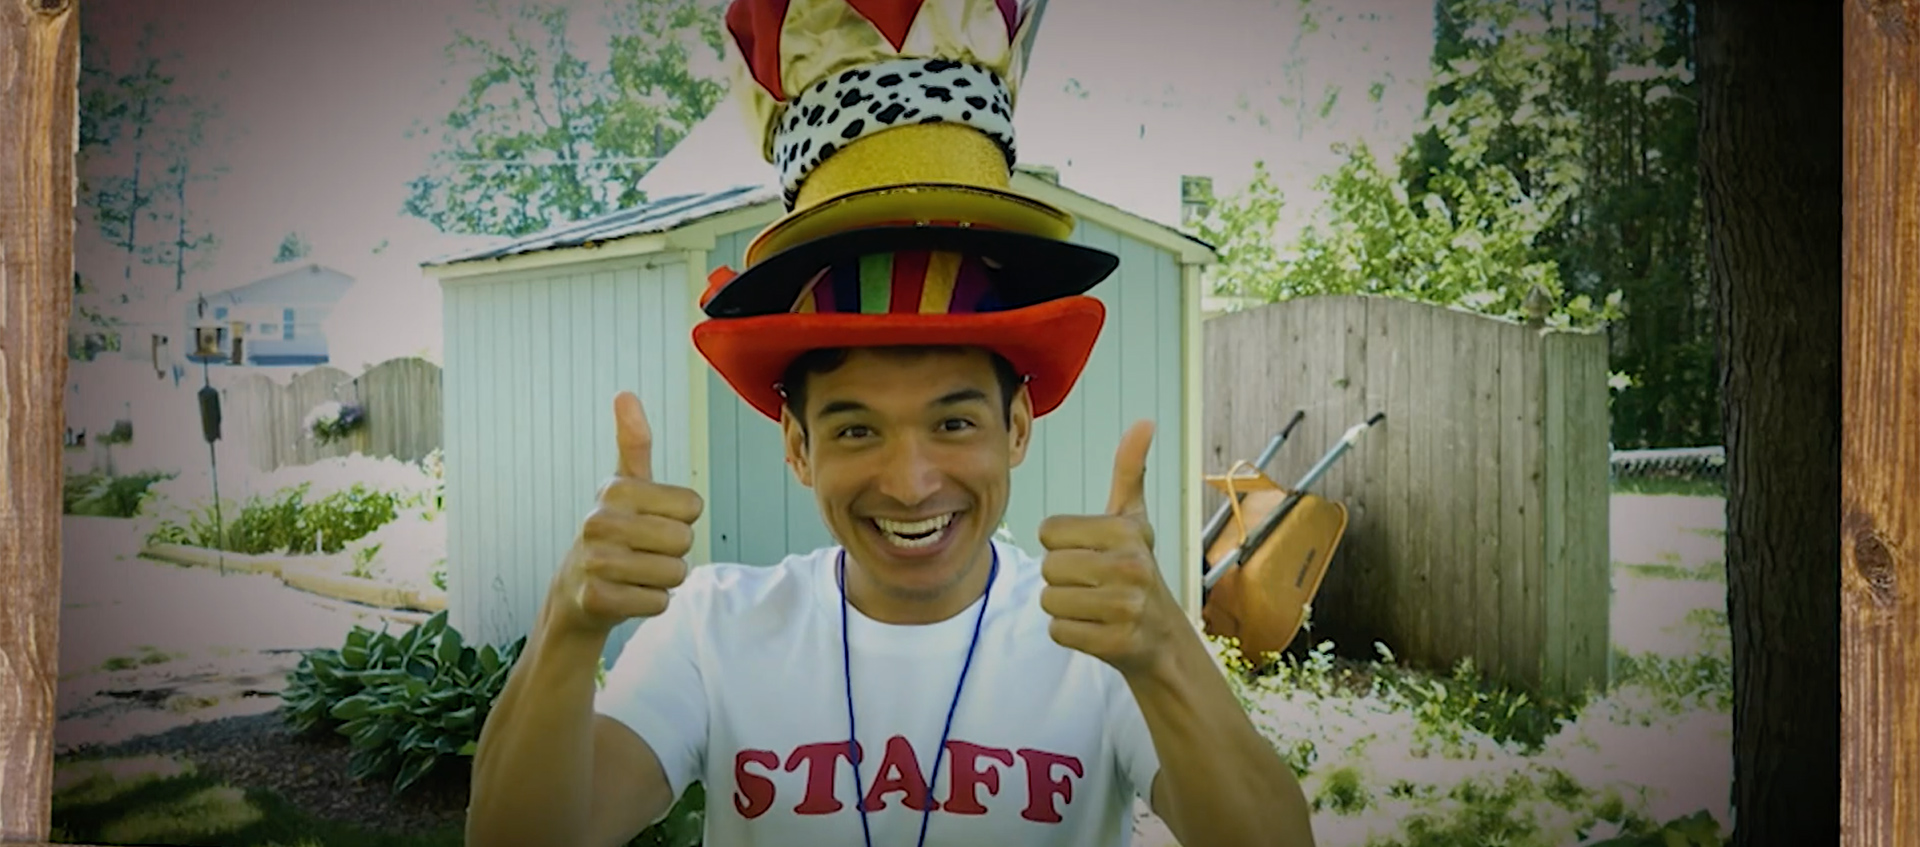 Actor Zachary Noah Piser smiles and wears a pile of hats and gives two thumbs up during an episode of PBS Thirteen's Camp TV